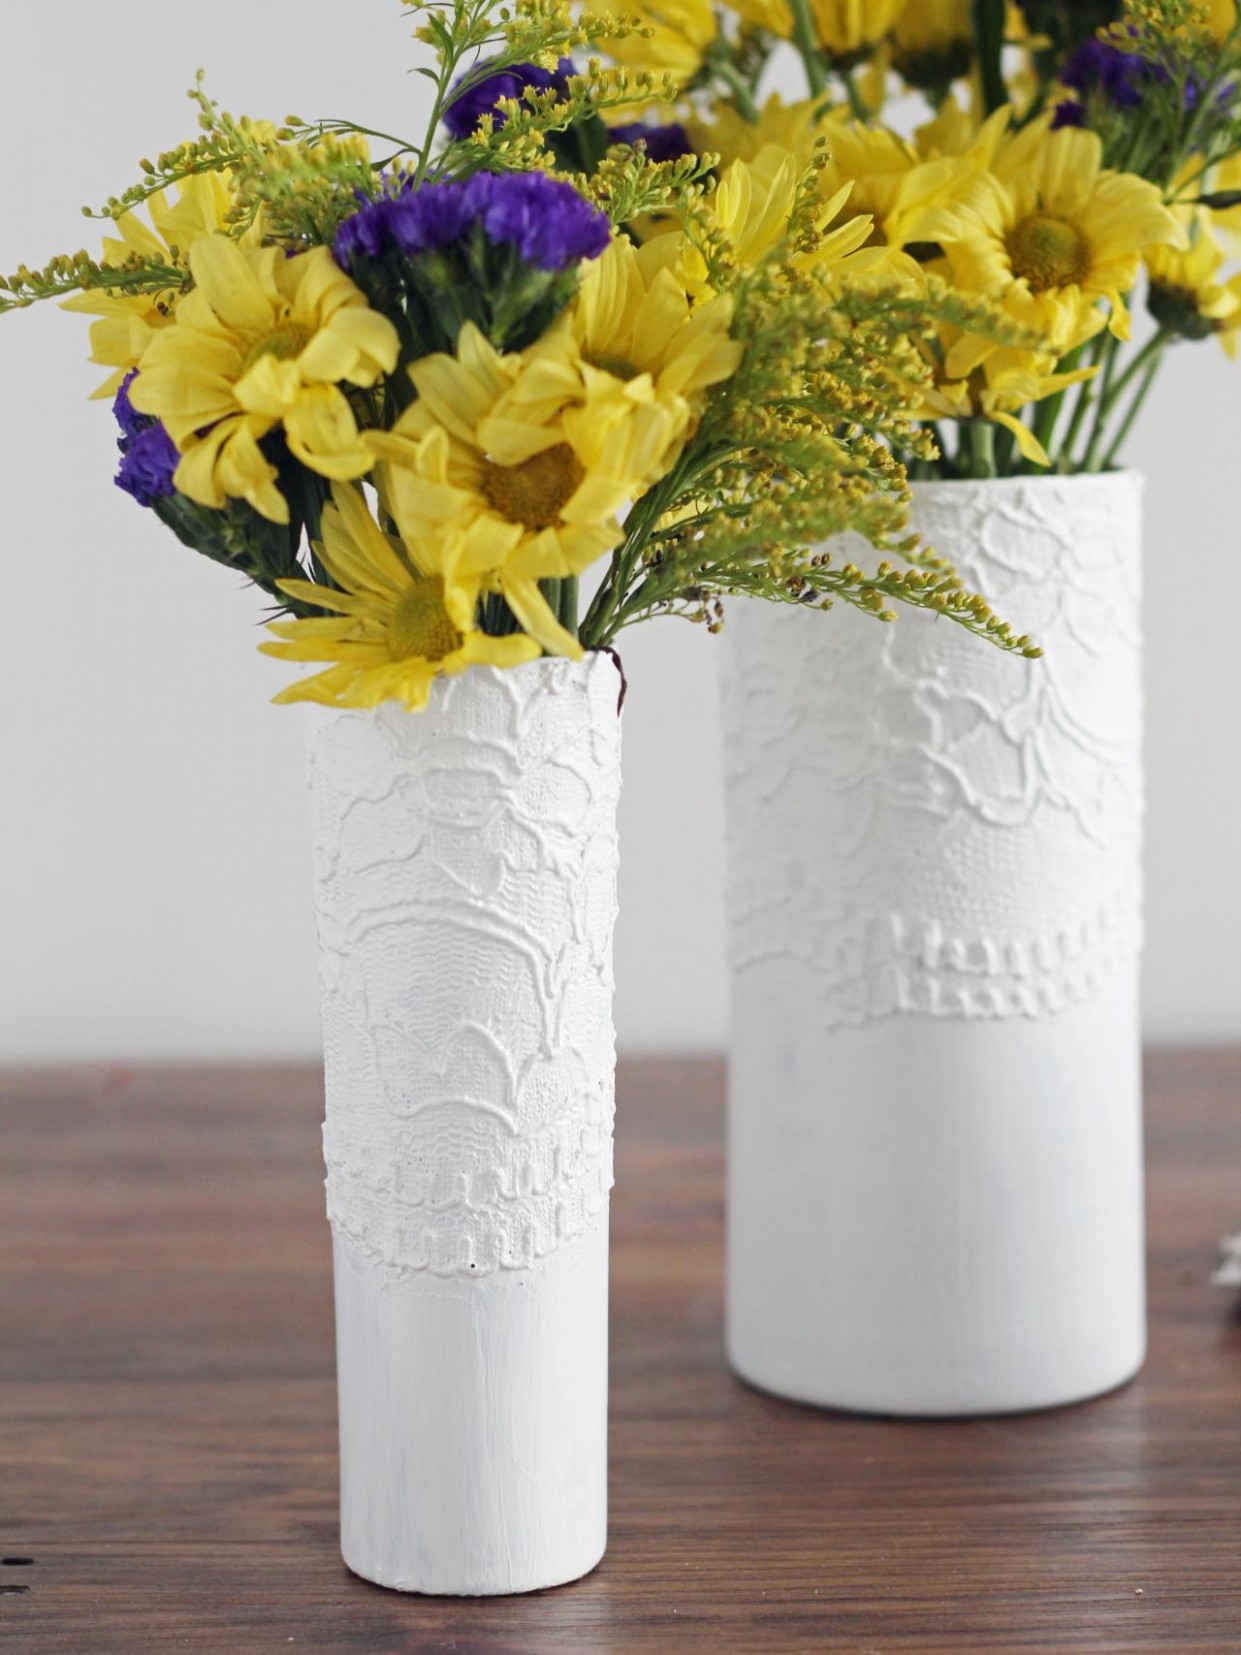 How To Make A Modern Textured Vase | Hgtv Paint Air Dry Clay